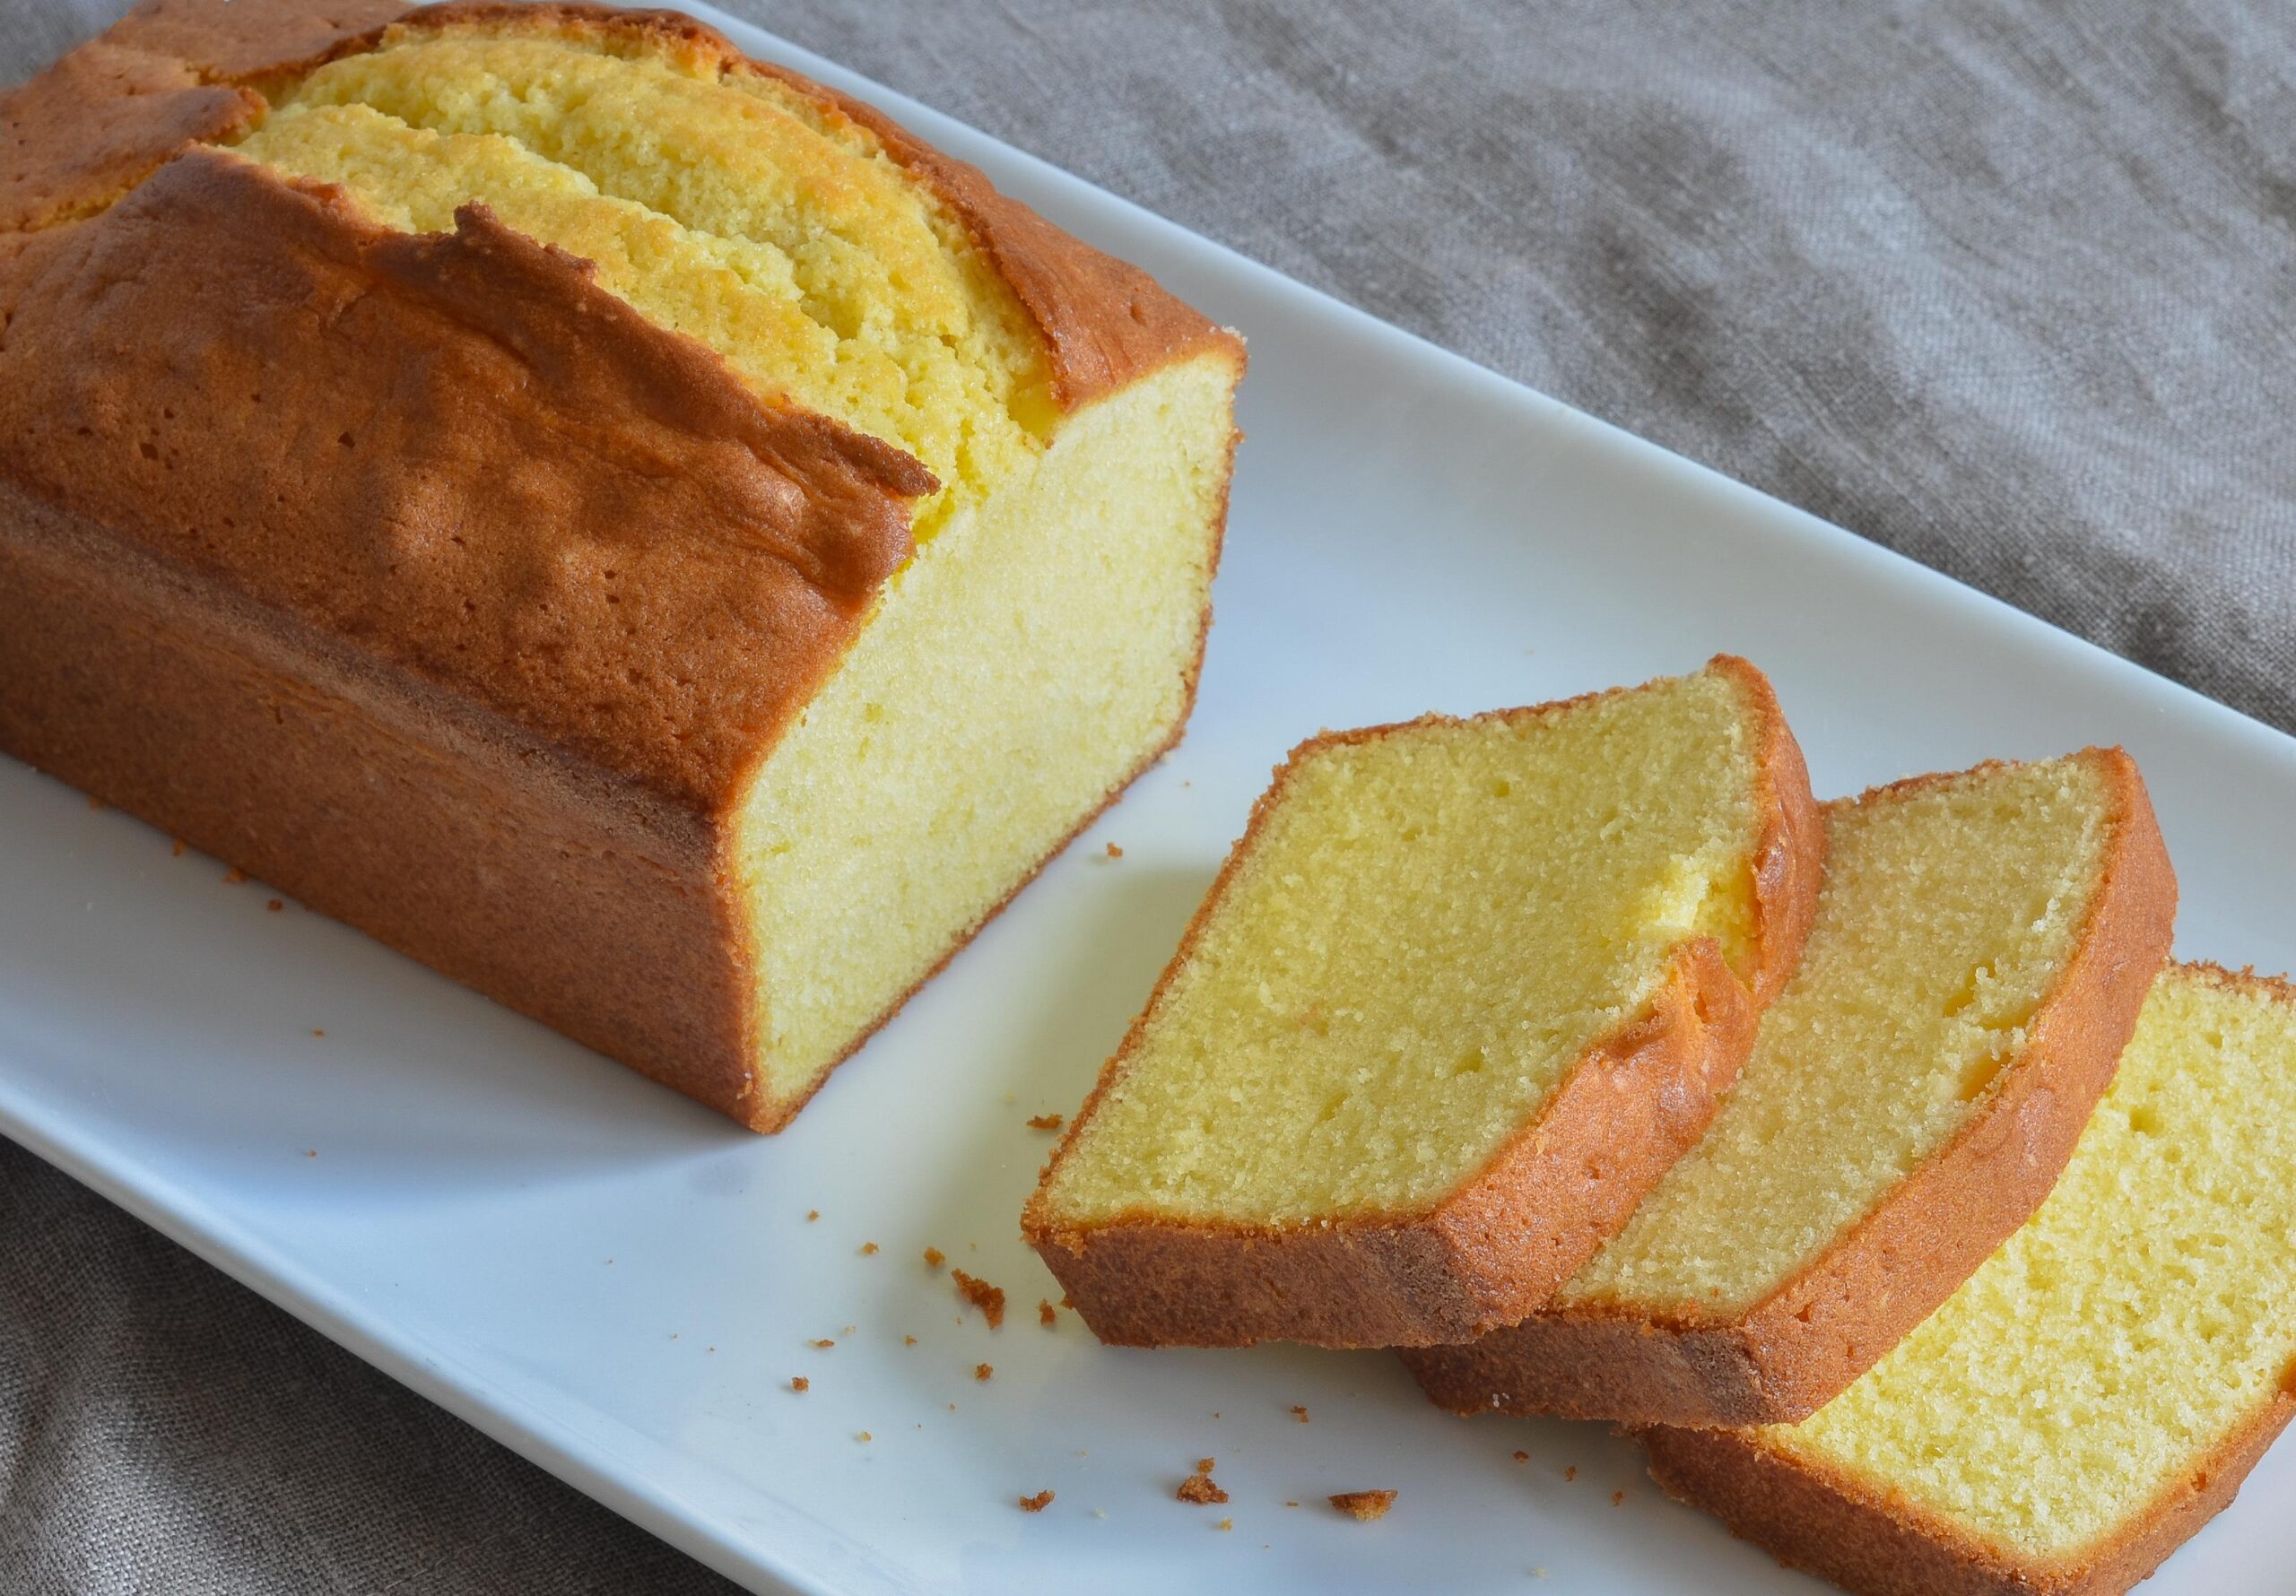  This rich and buttery pound cake is a classic that never goes out of style.